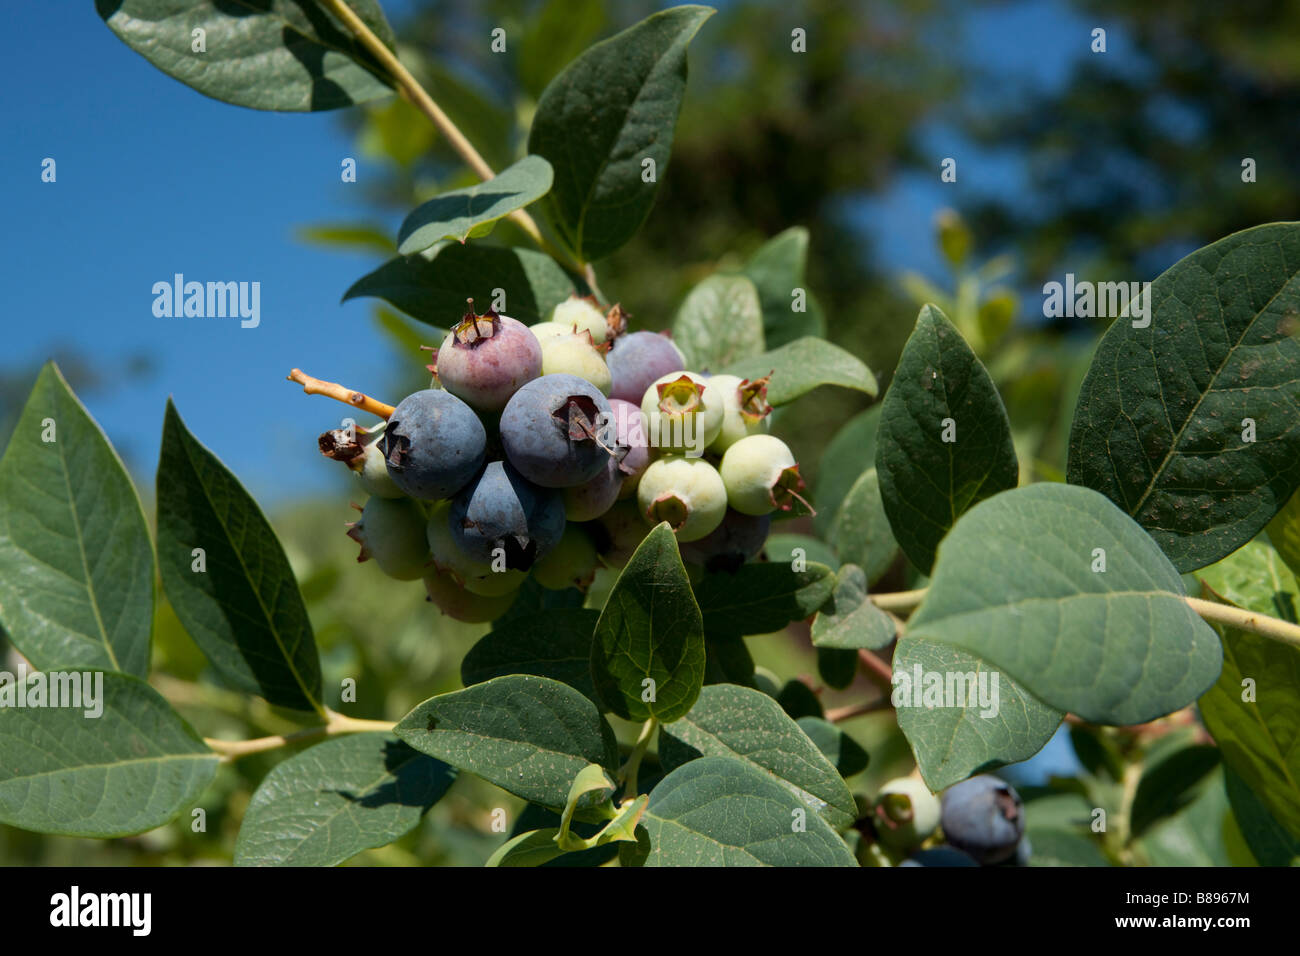 Blueberries, Vaccinium sp.,rippening in the sun, Chile Stock Photo